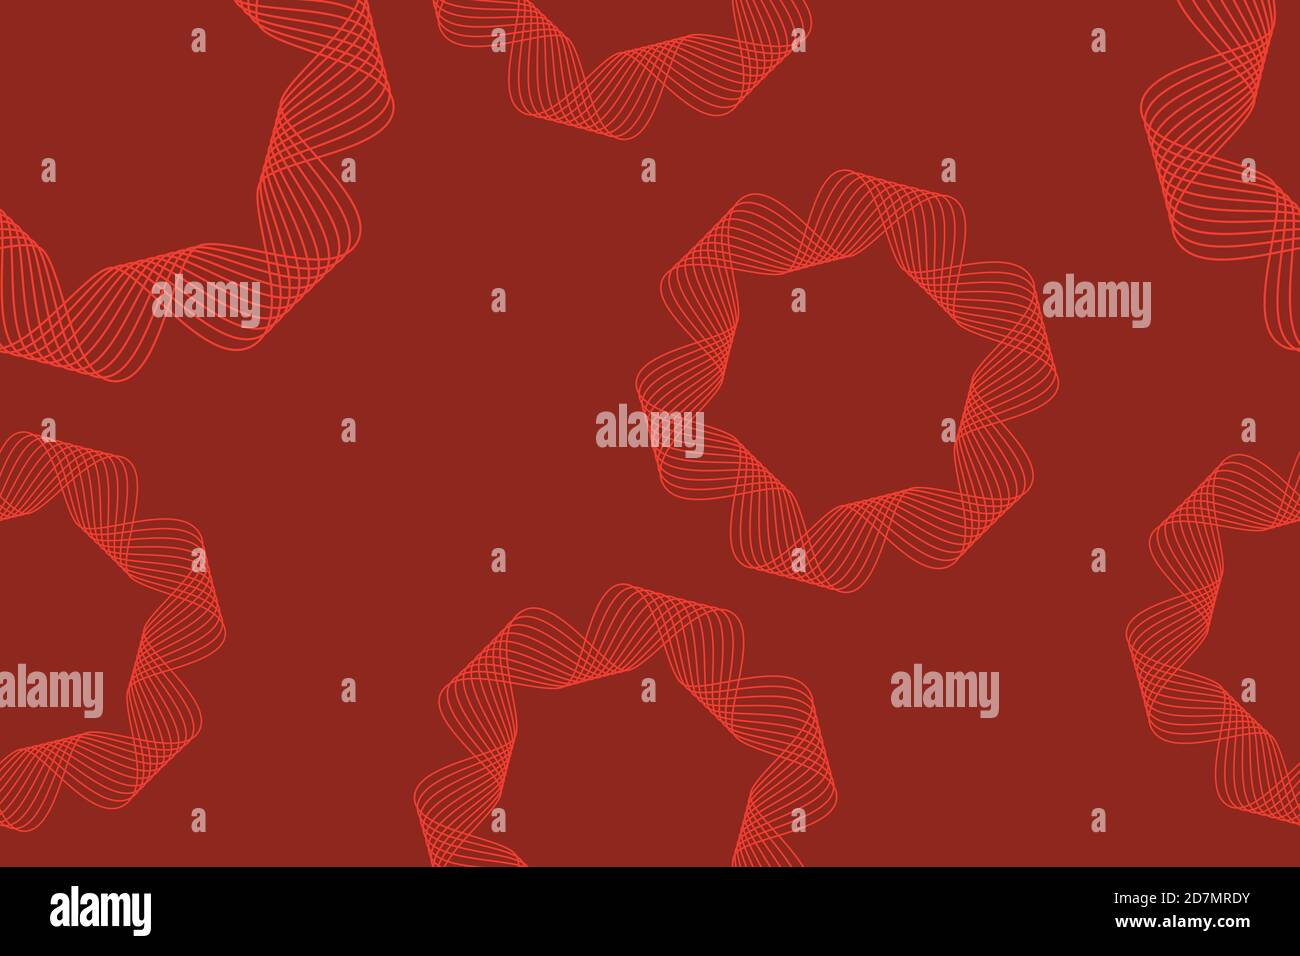 Seamless, abstract background pattern made with repeated curvy lines in flower abstraction. Modern, decorative and simple vector art in orange and red Stock Photo